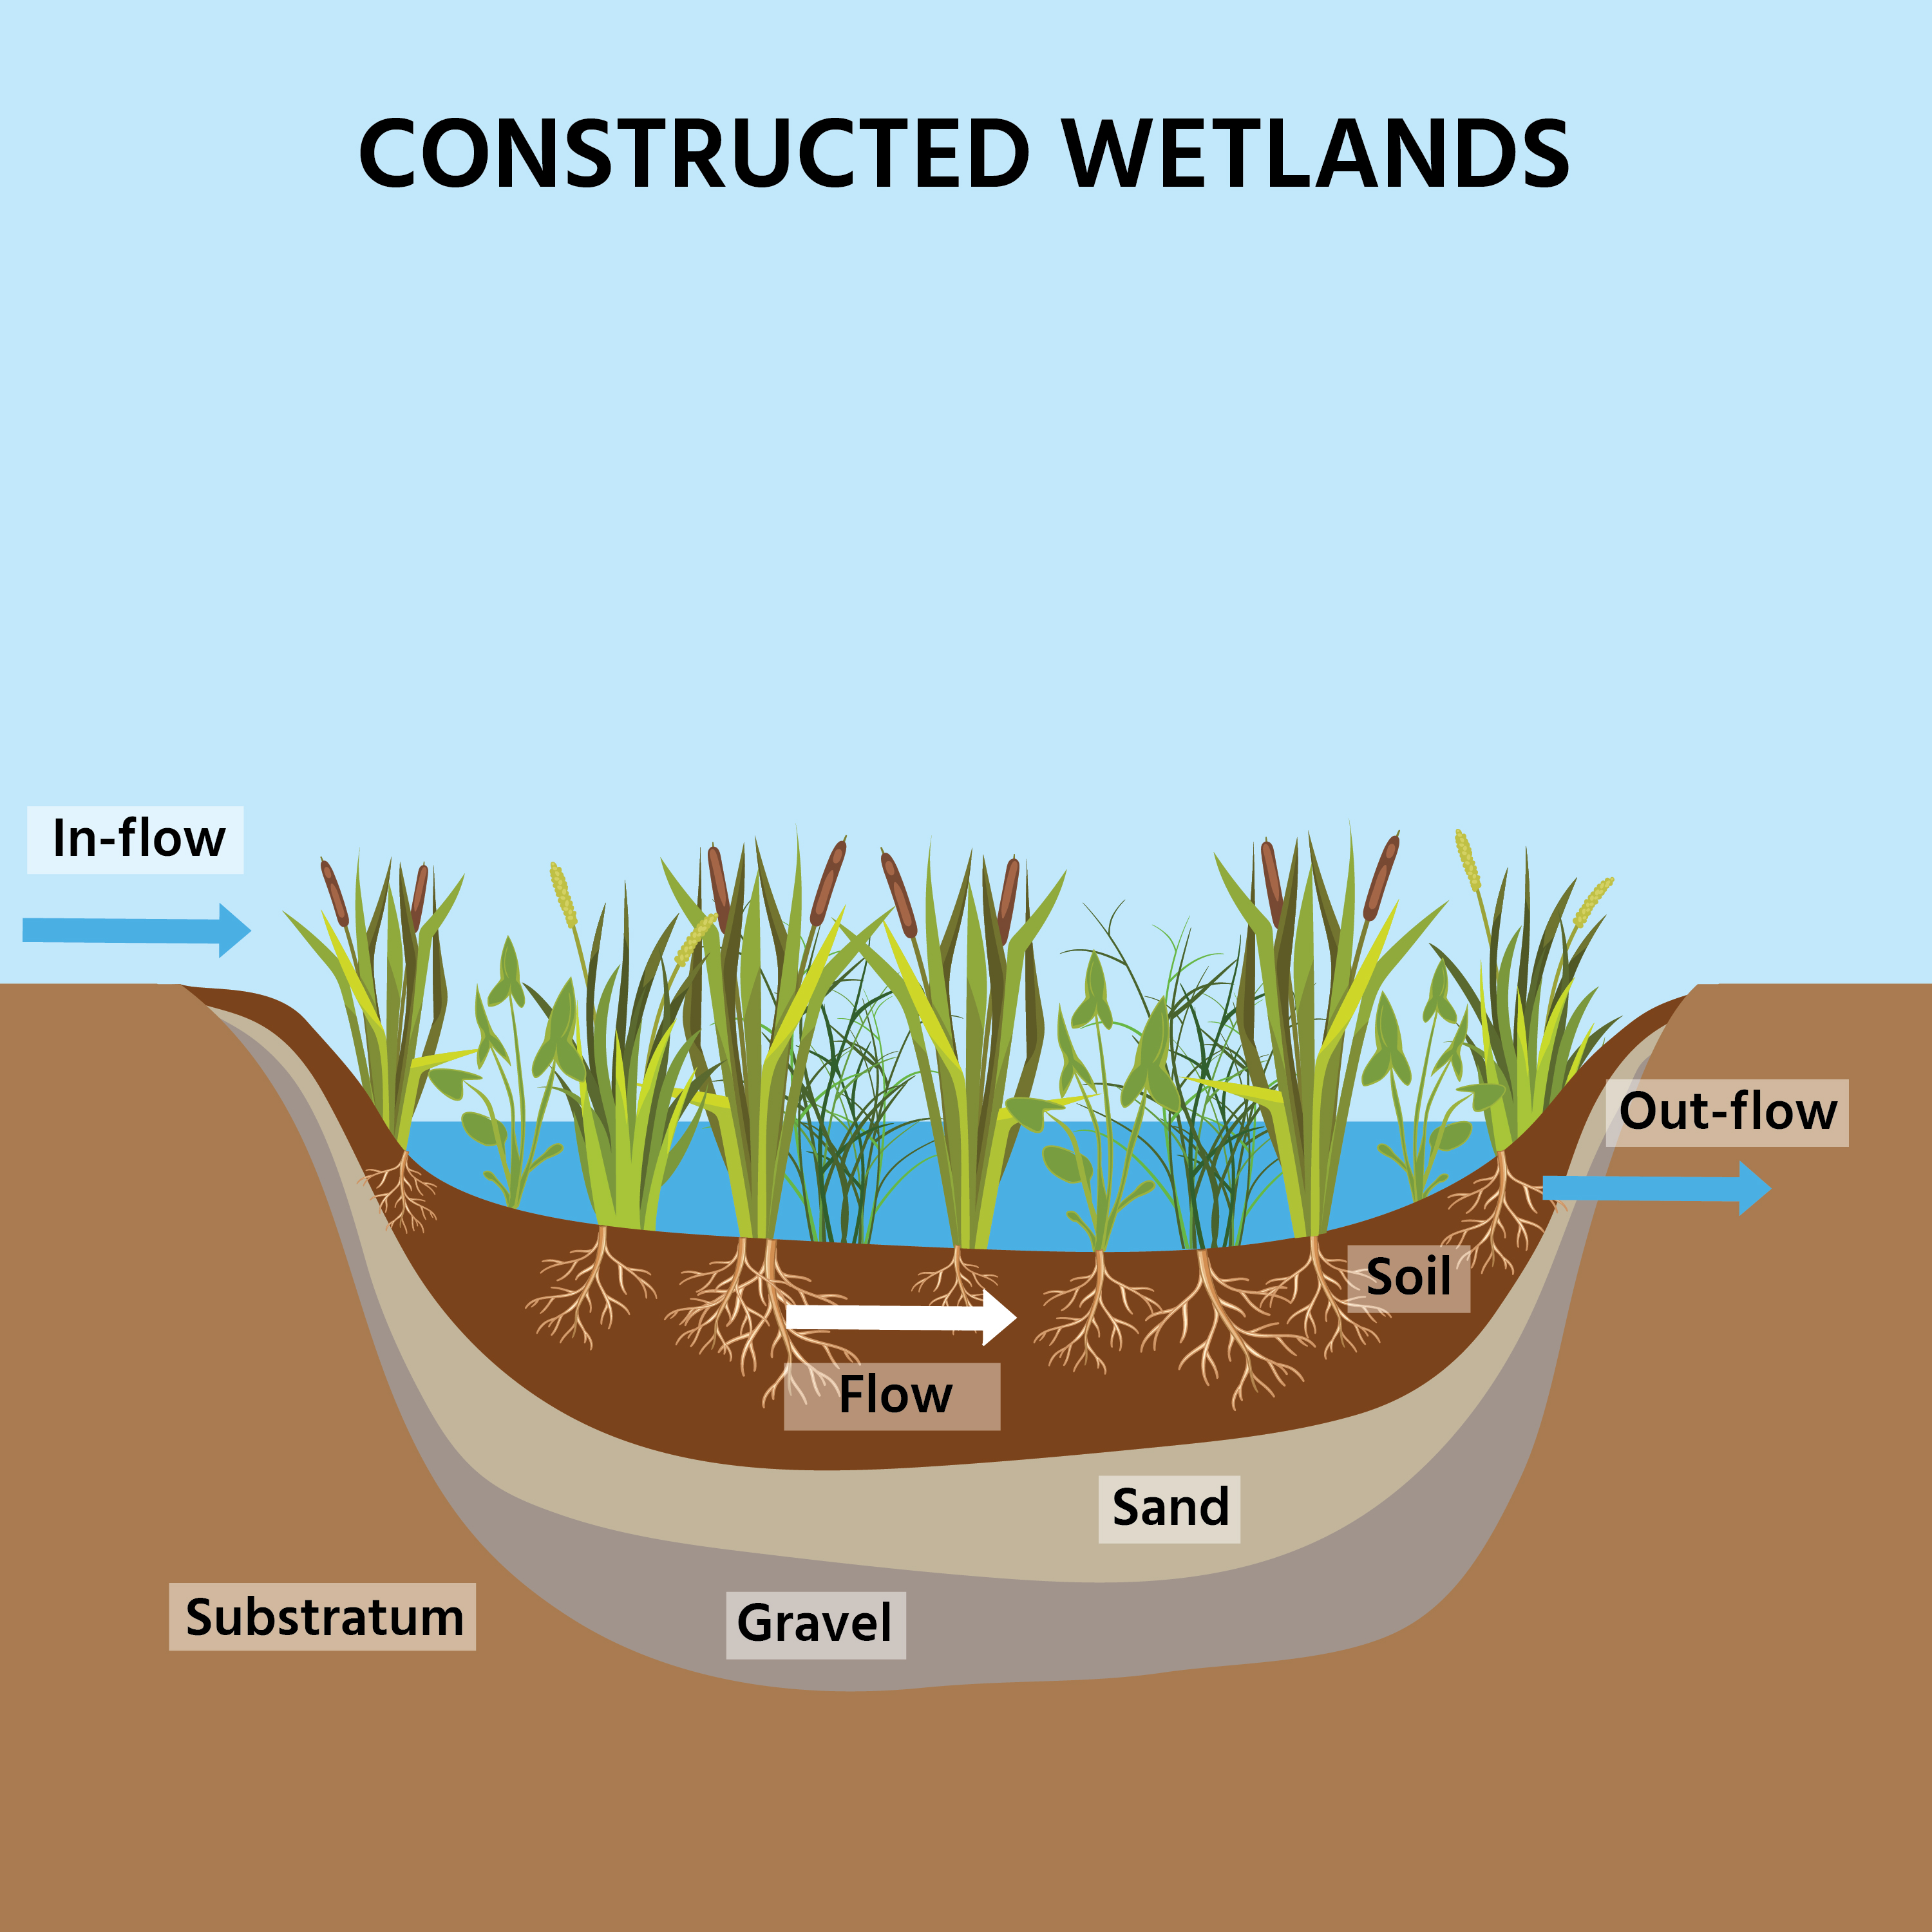 educational illustration of a constructed wetland diagramming how water flows through